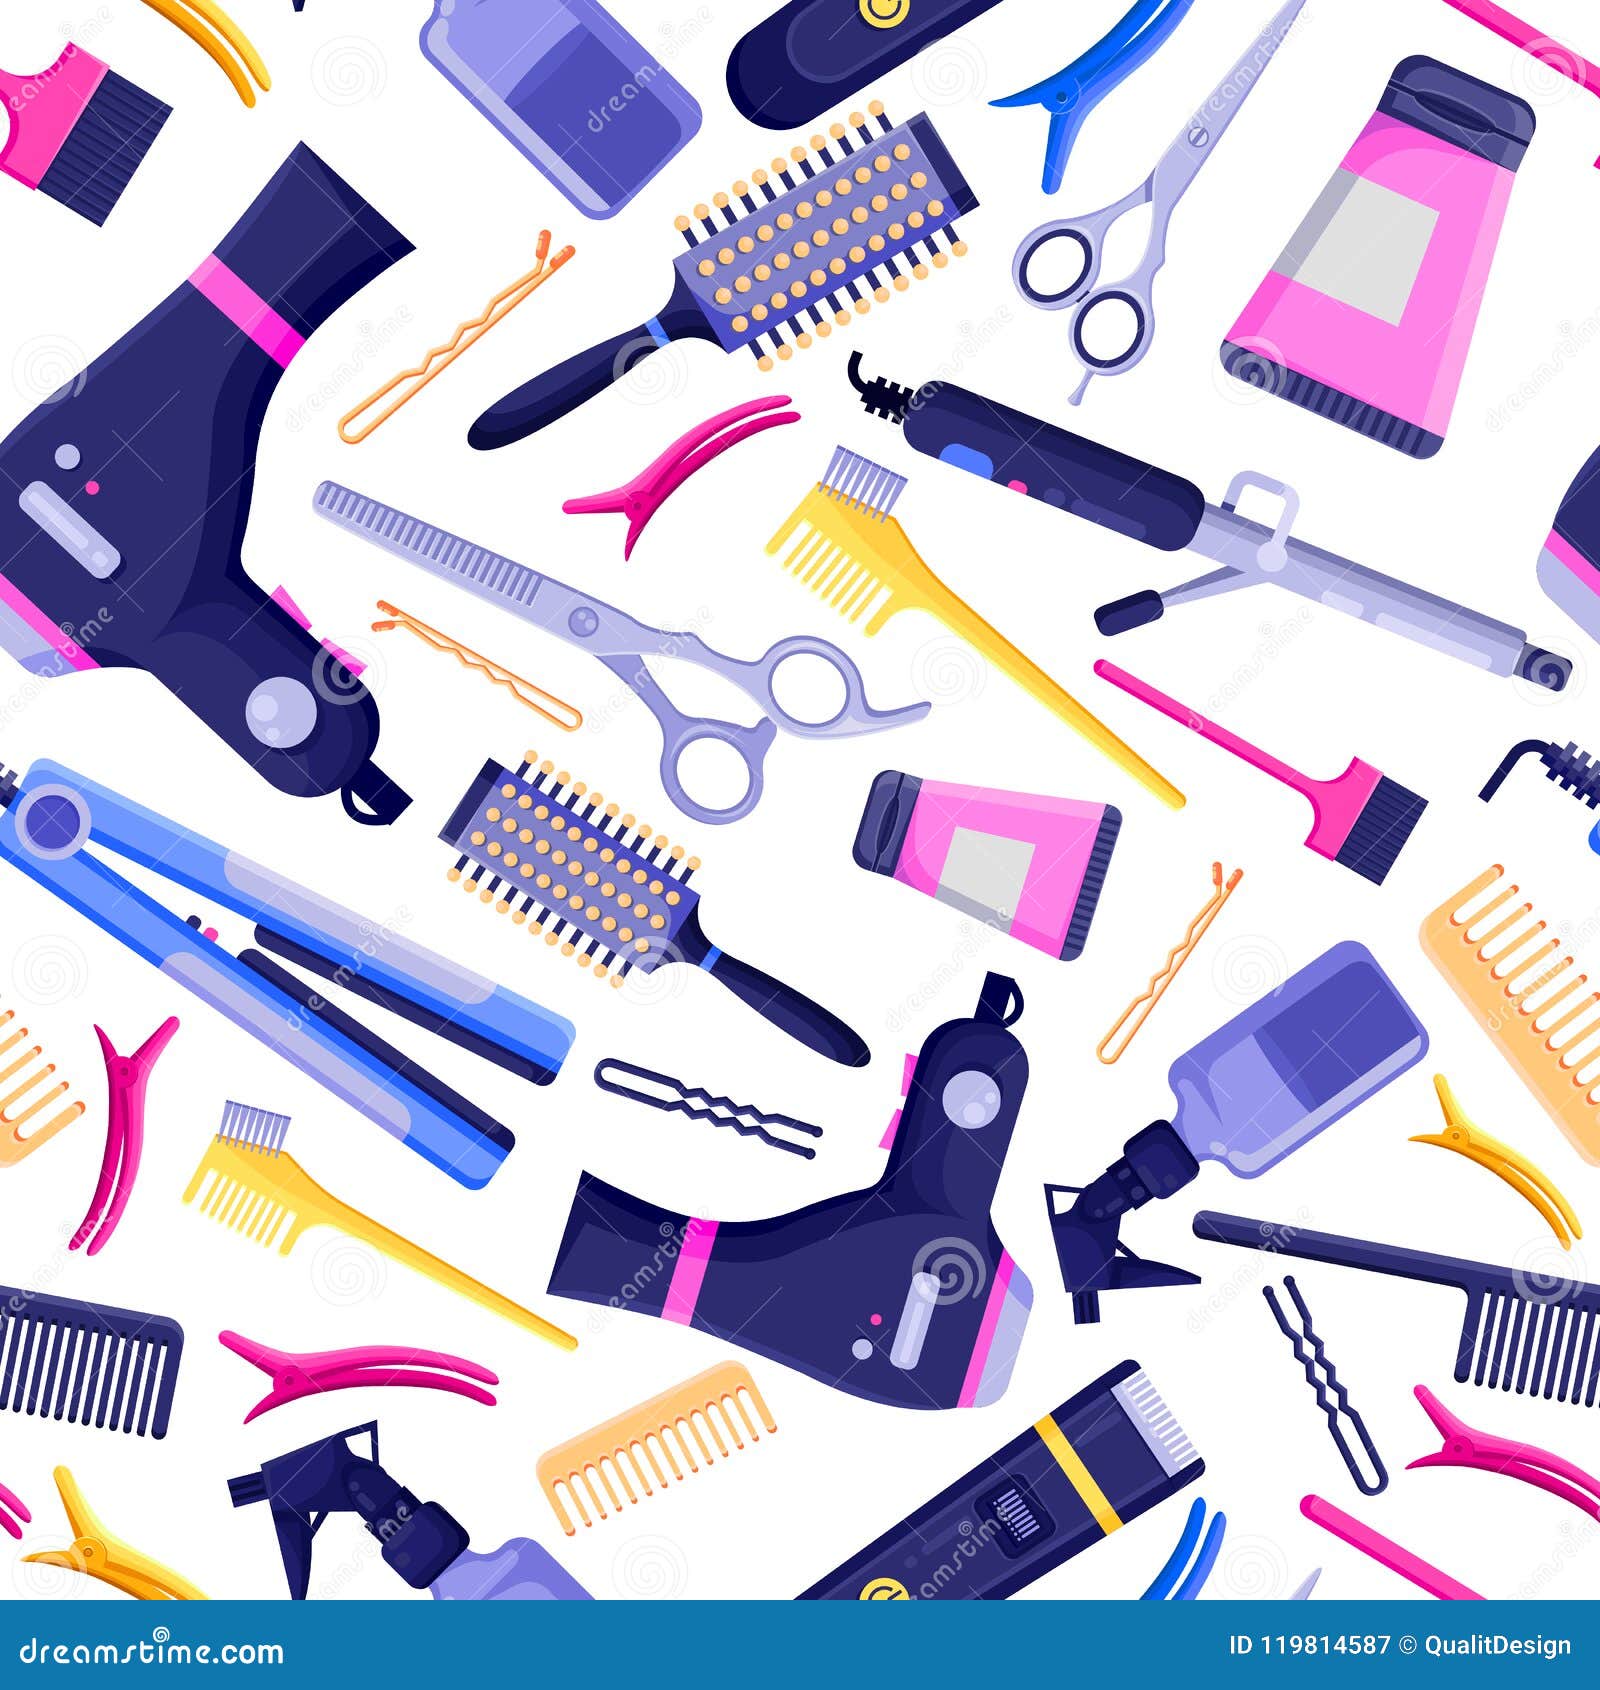 beauty salon  seamless pattern. colorful hair hairdresser tools and equipment.